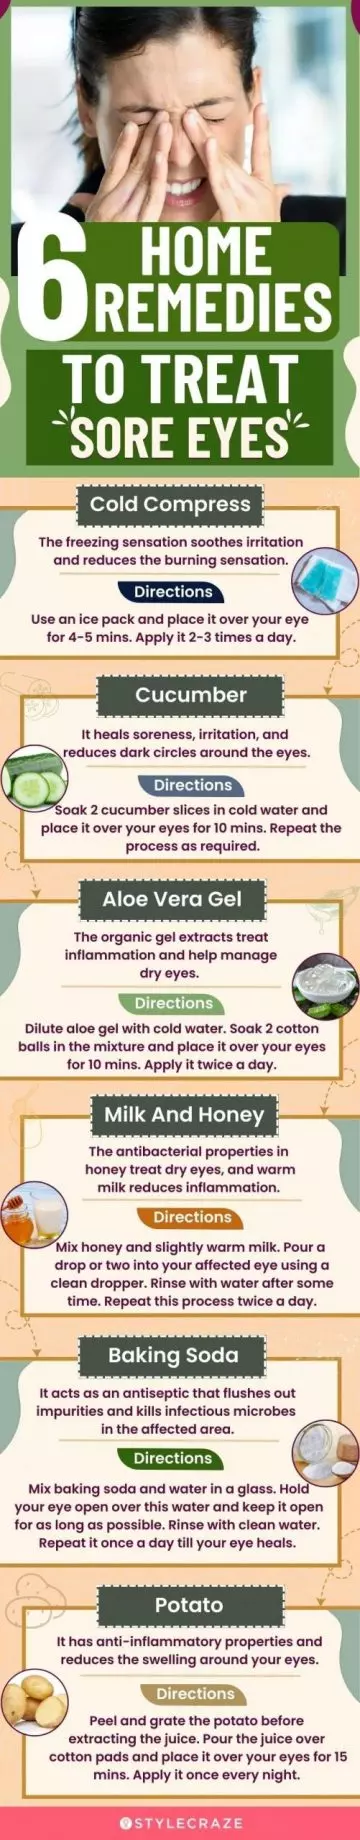 6 home remedies to treat sore eyes (infographic)